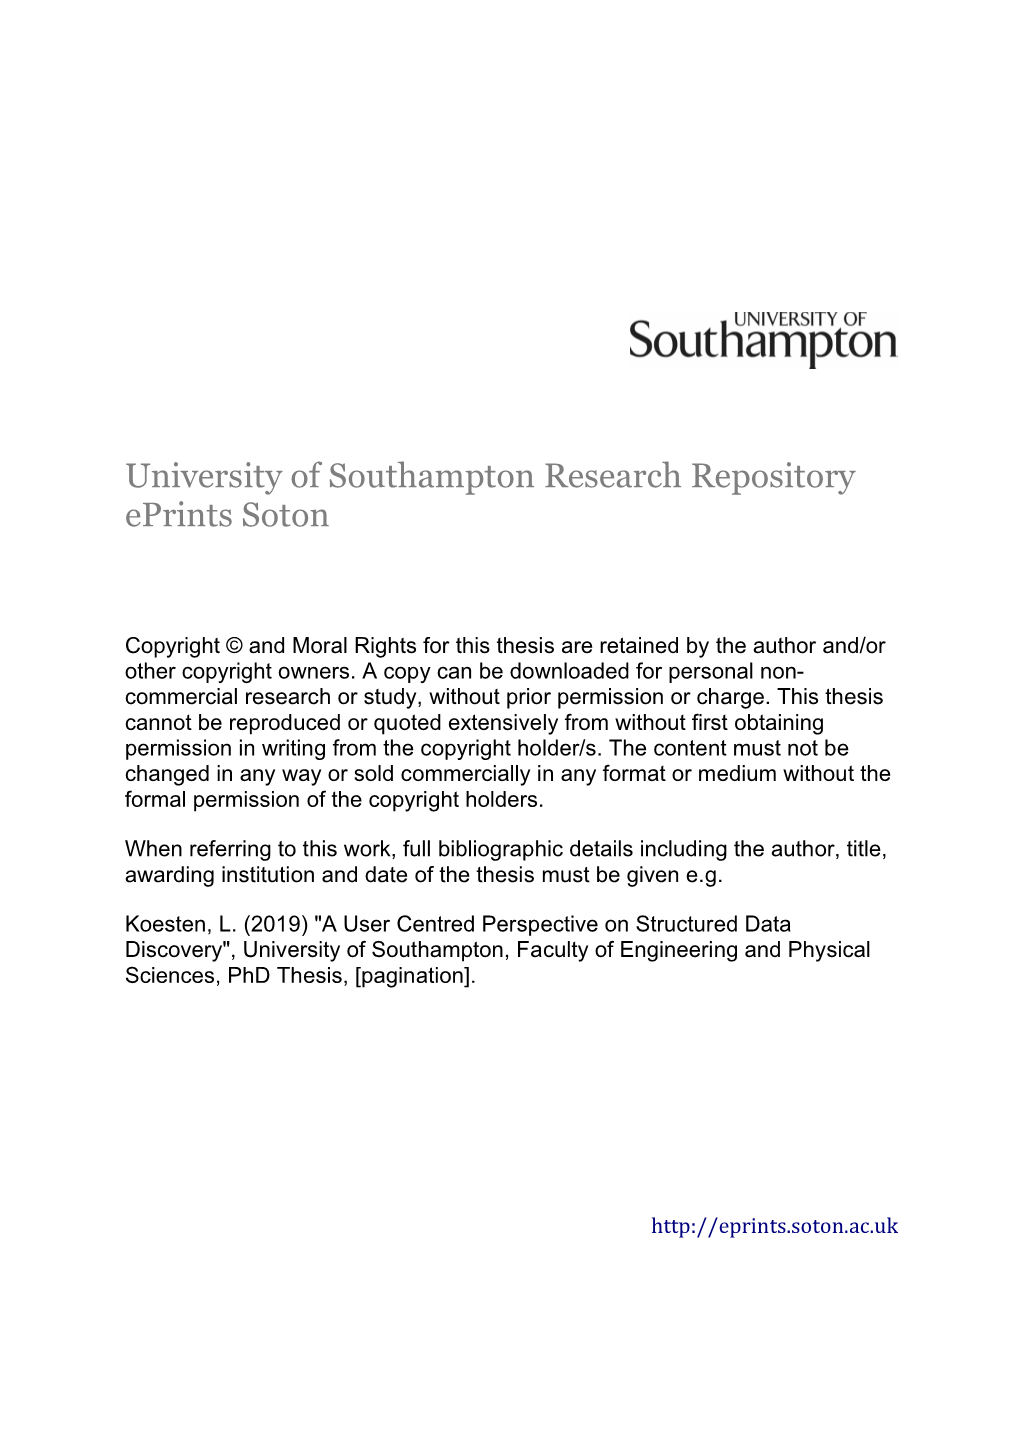 A User Centred Perspective on Structured Data Discovery", University of Southampton, Faculty of Engineering and Physical Sciences, Phd Thesis, [Pagination]